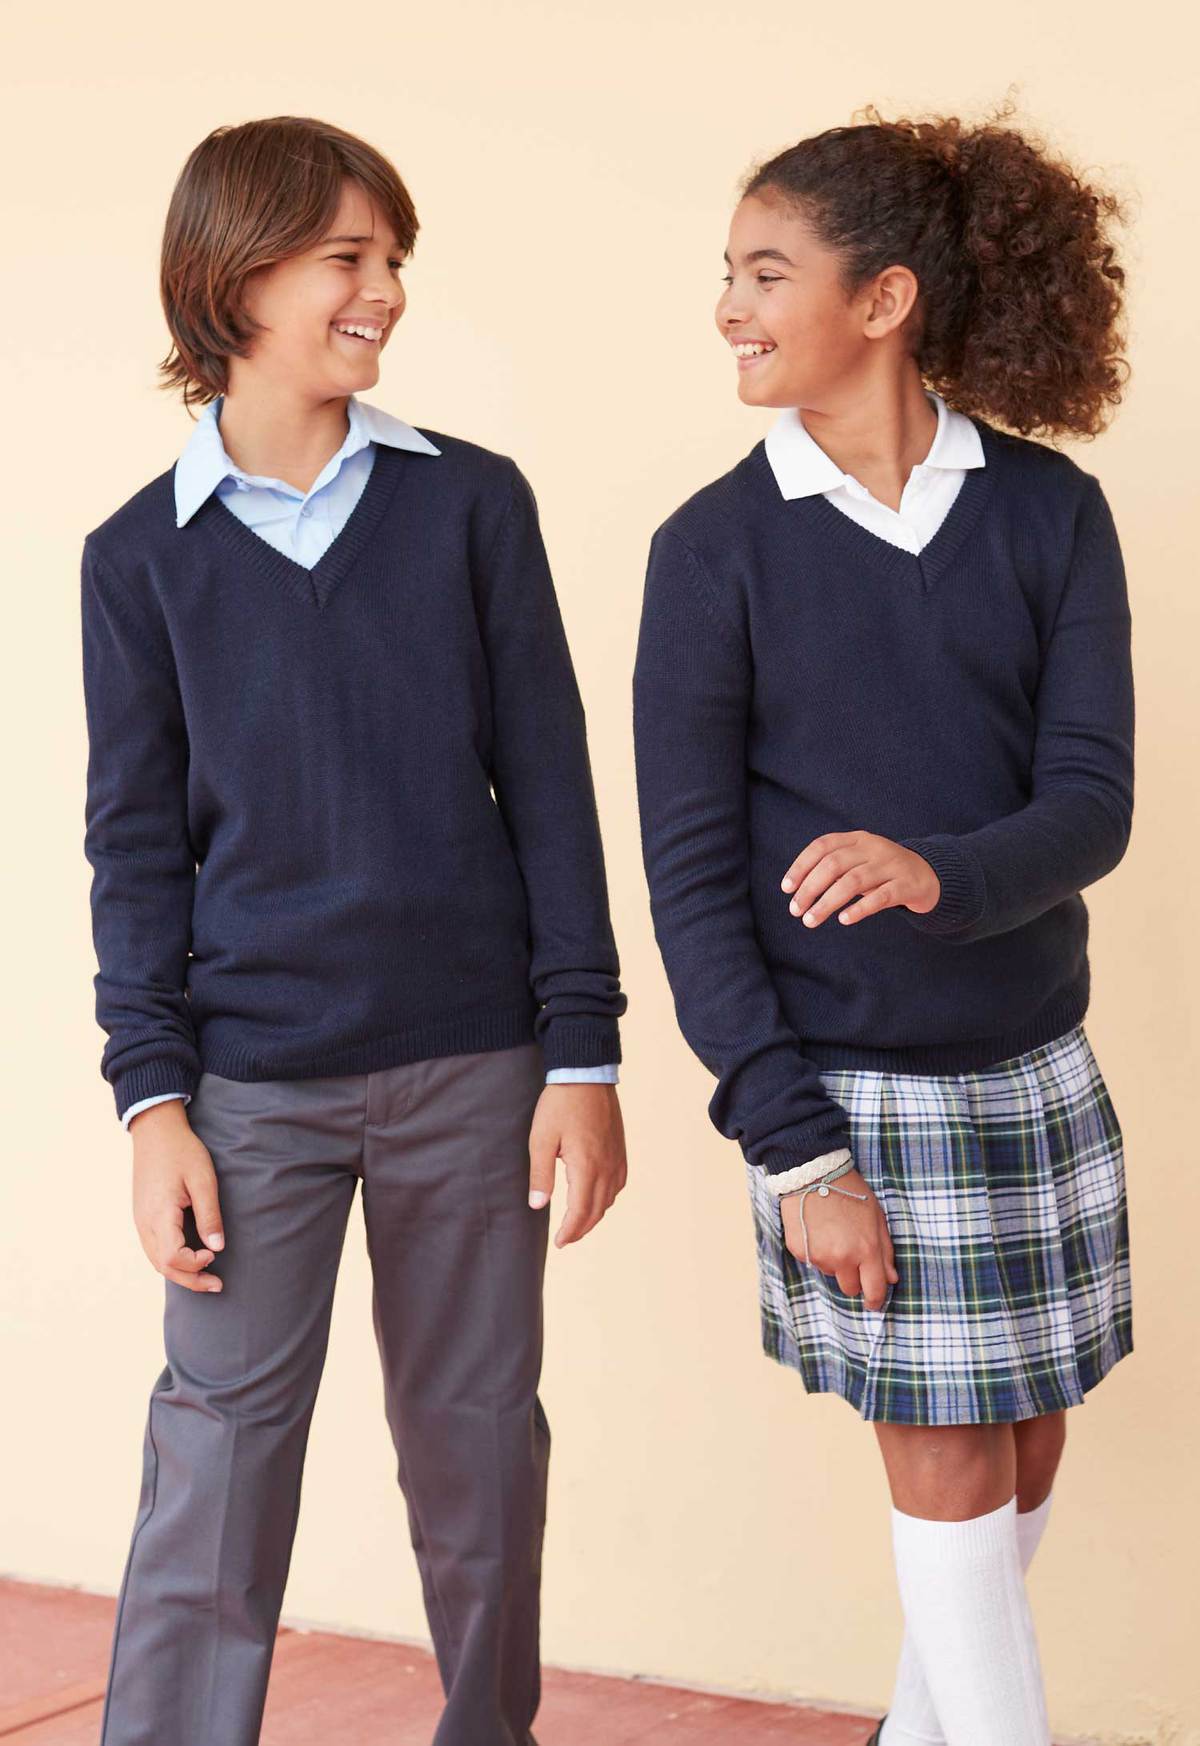 Boy and girl in uniforms sweaters